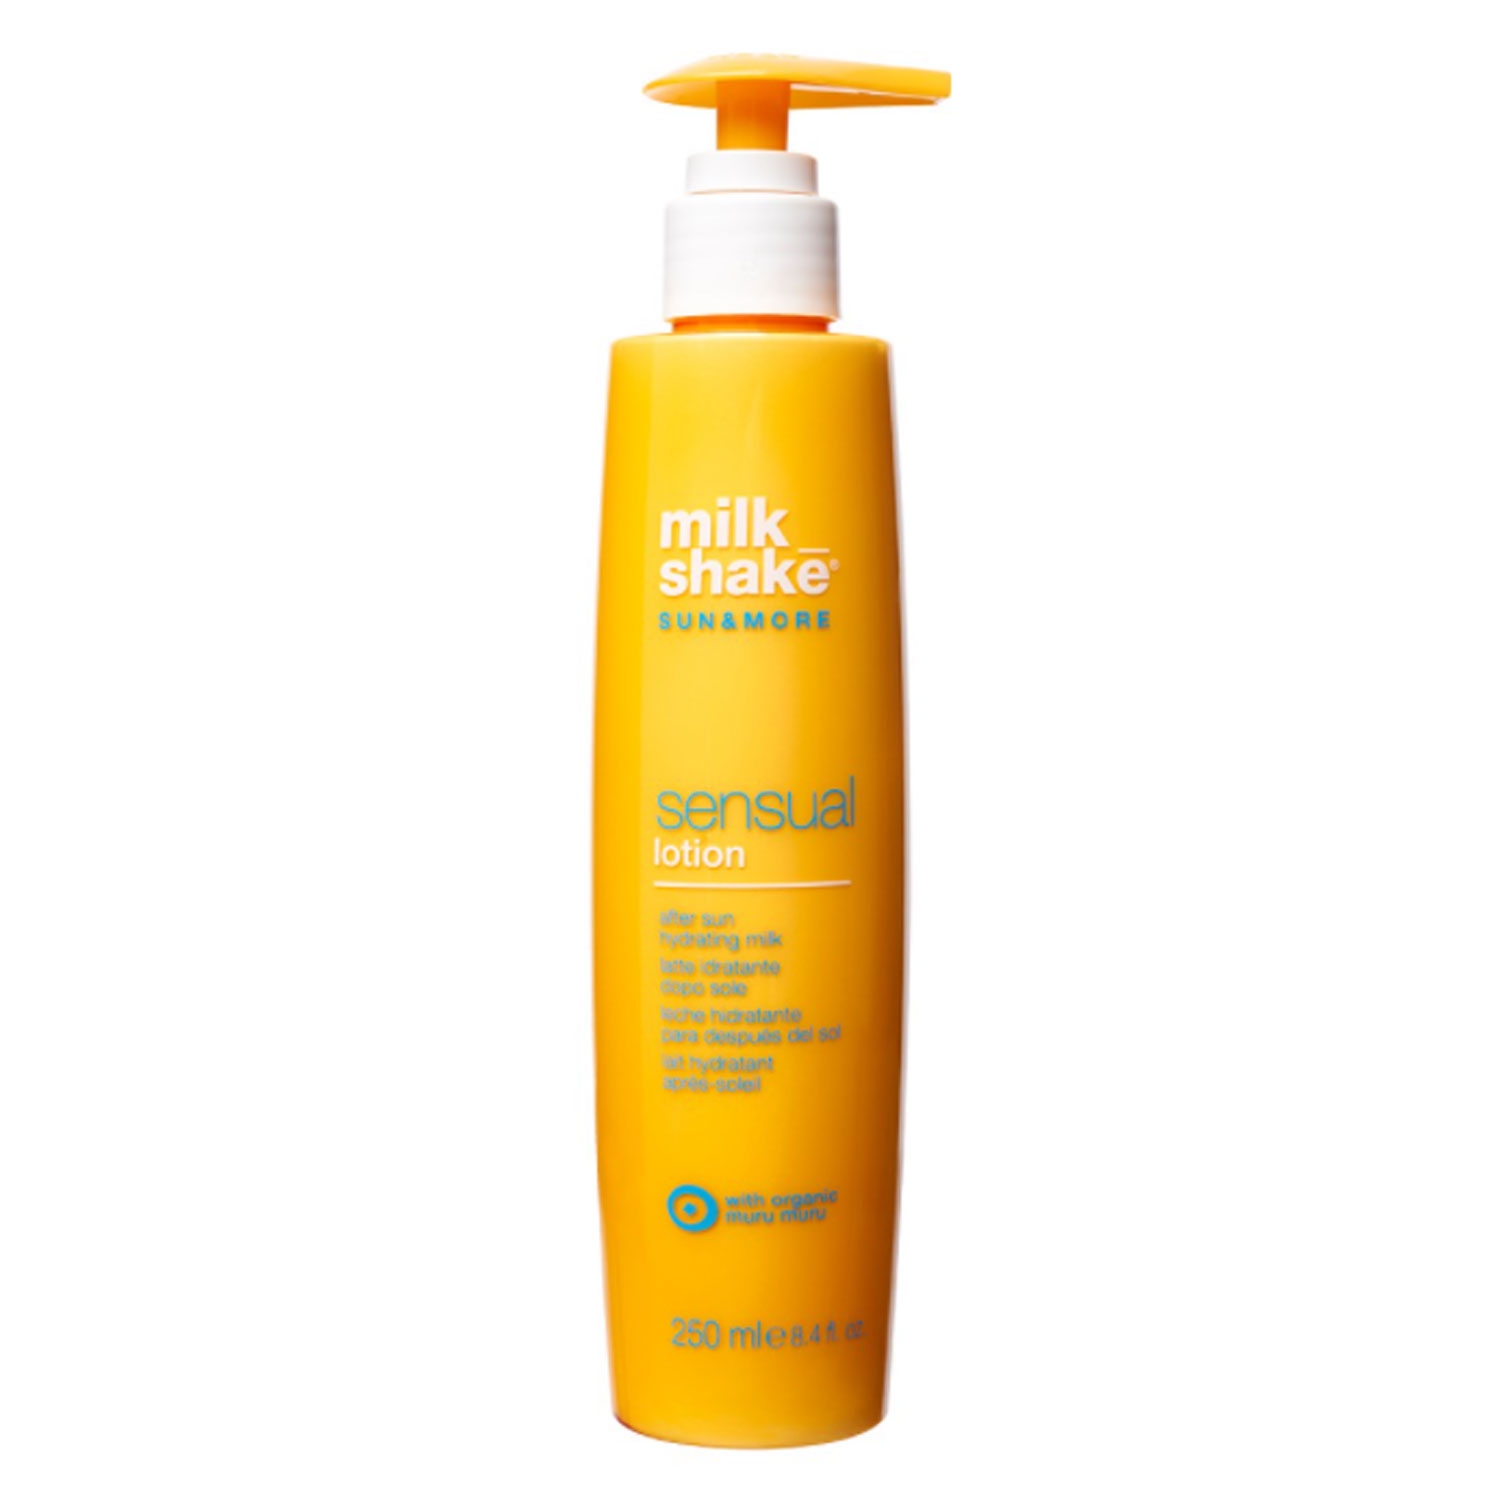 Product image from milk_shake sun&more - sensual lotion